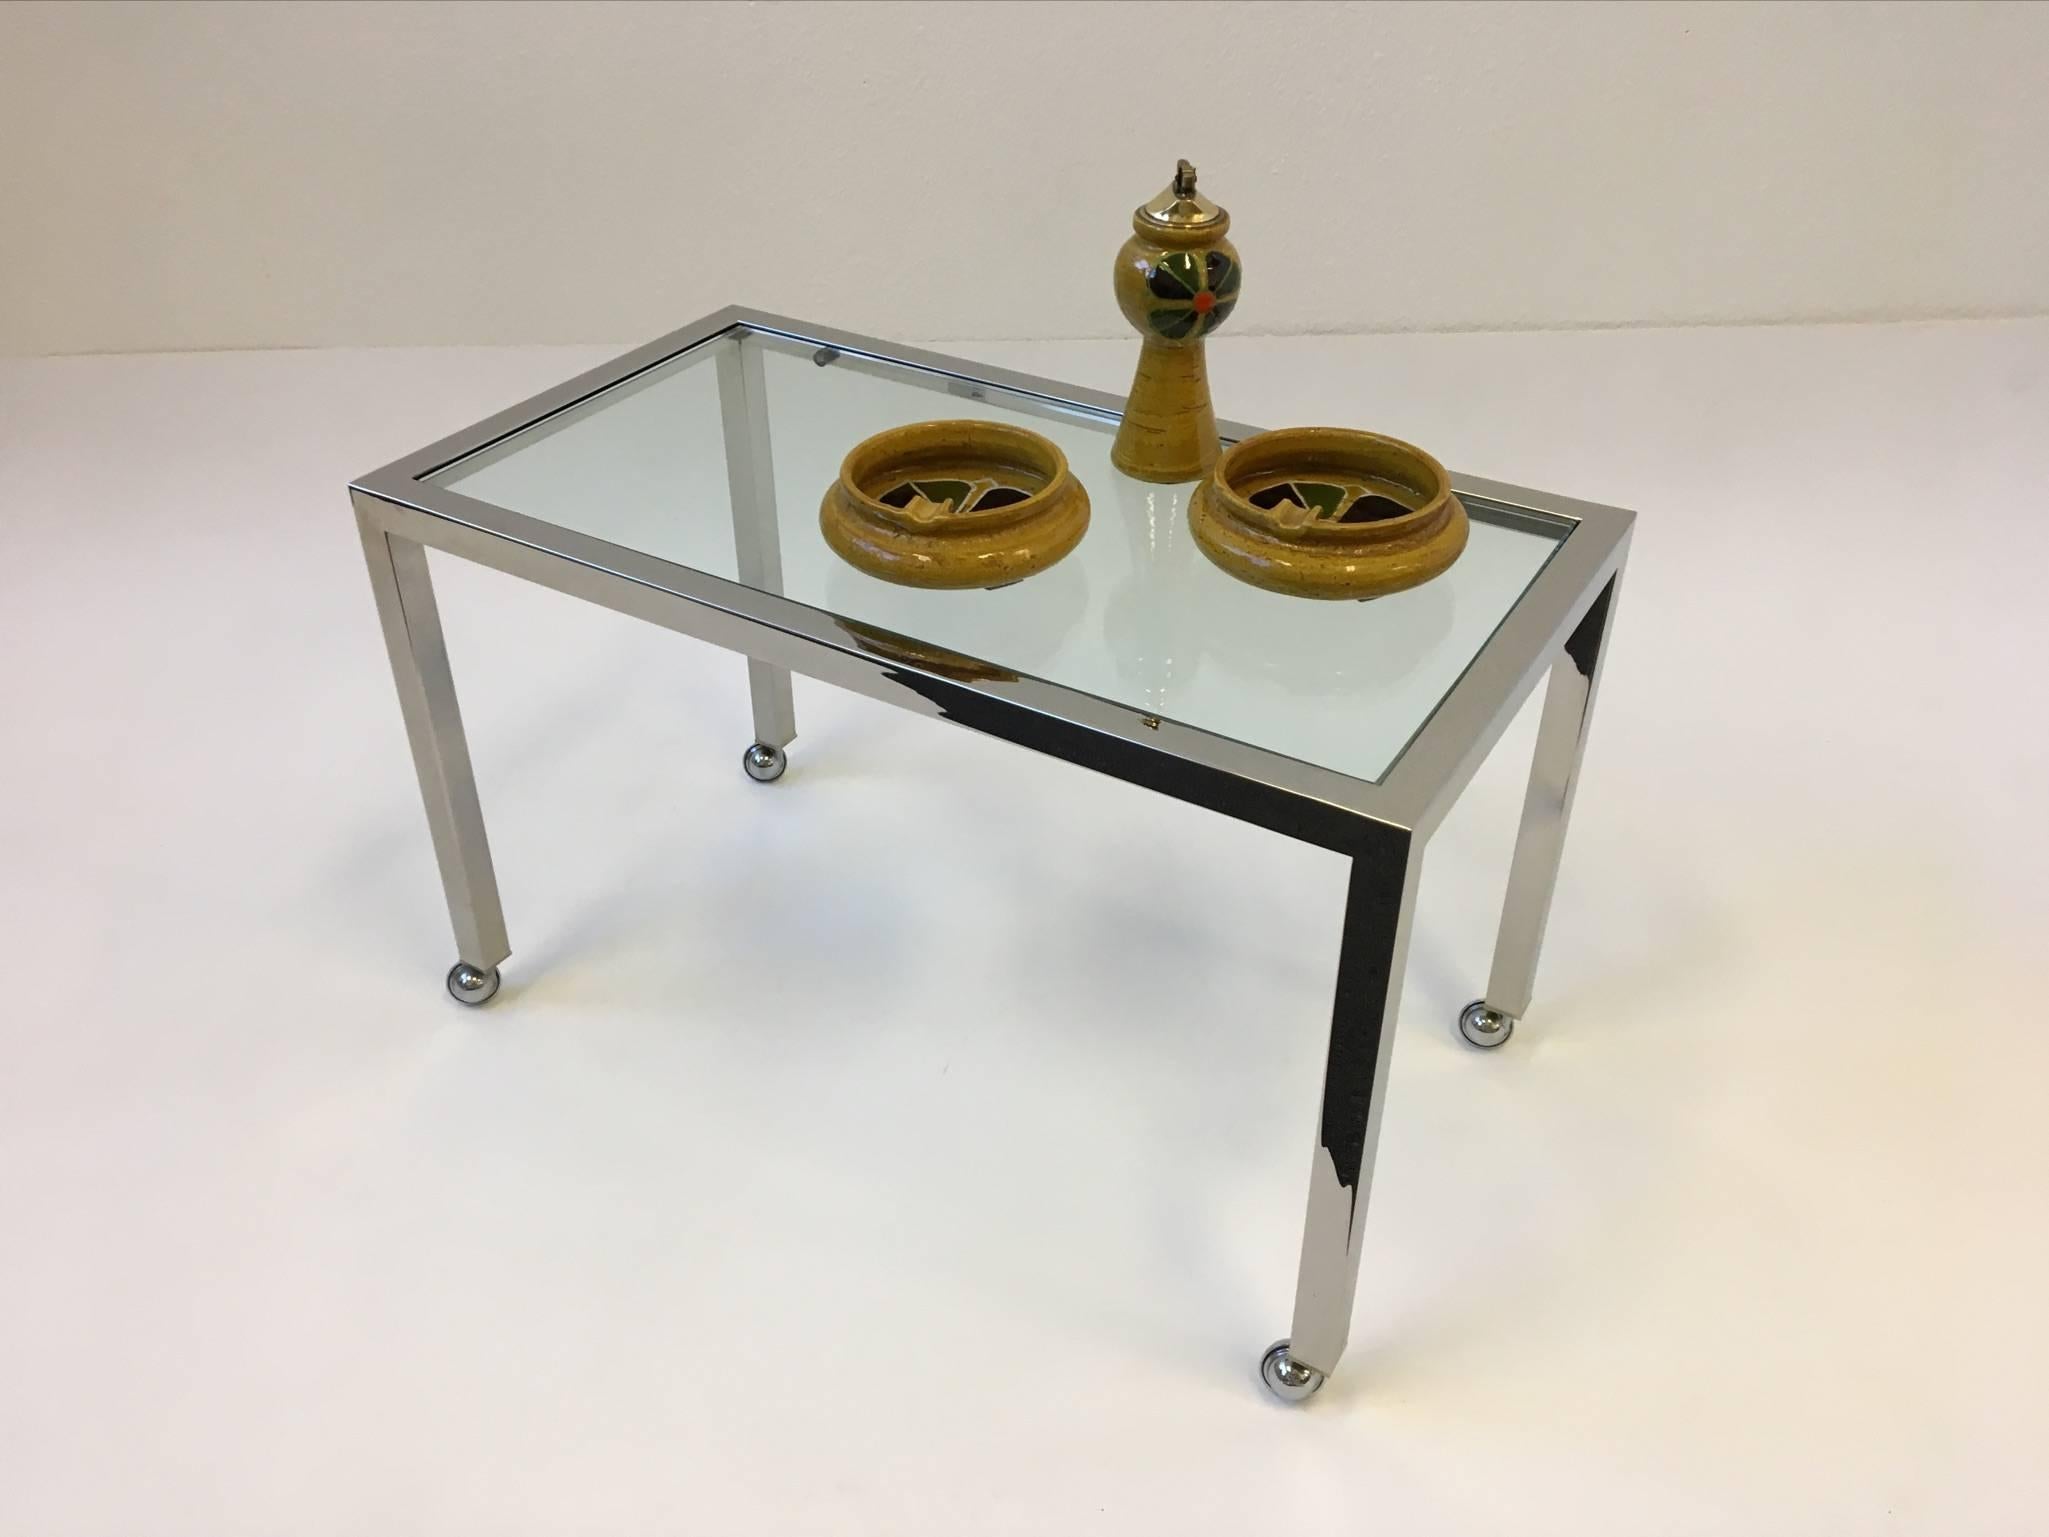 A simple but elegant chrome and glass side table made by Design Institute America in the style of Milo Baughman.
The table has small chrome caster. The glass insert is 1/2" thick. The table in original condition.
Dimensions: 26" wide,